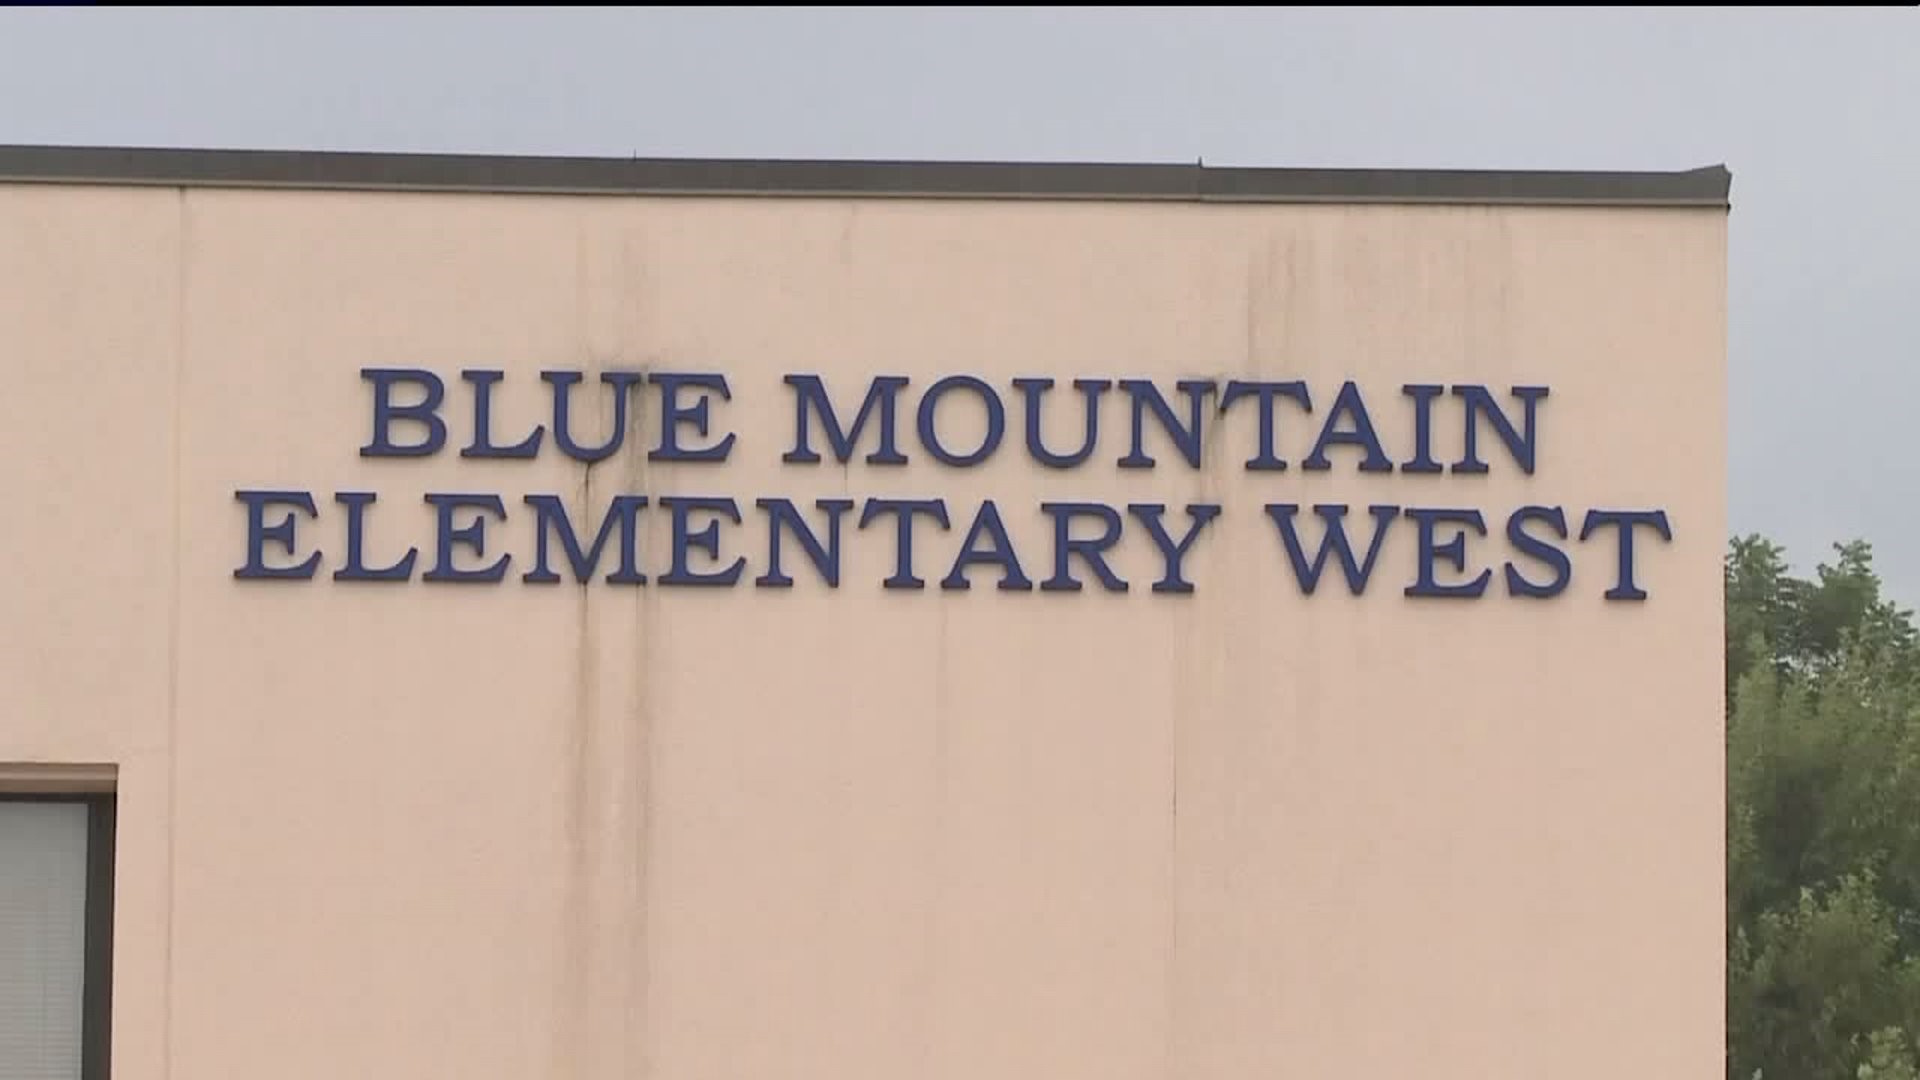 Mold Issue at Elementary School